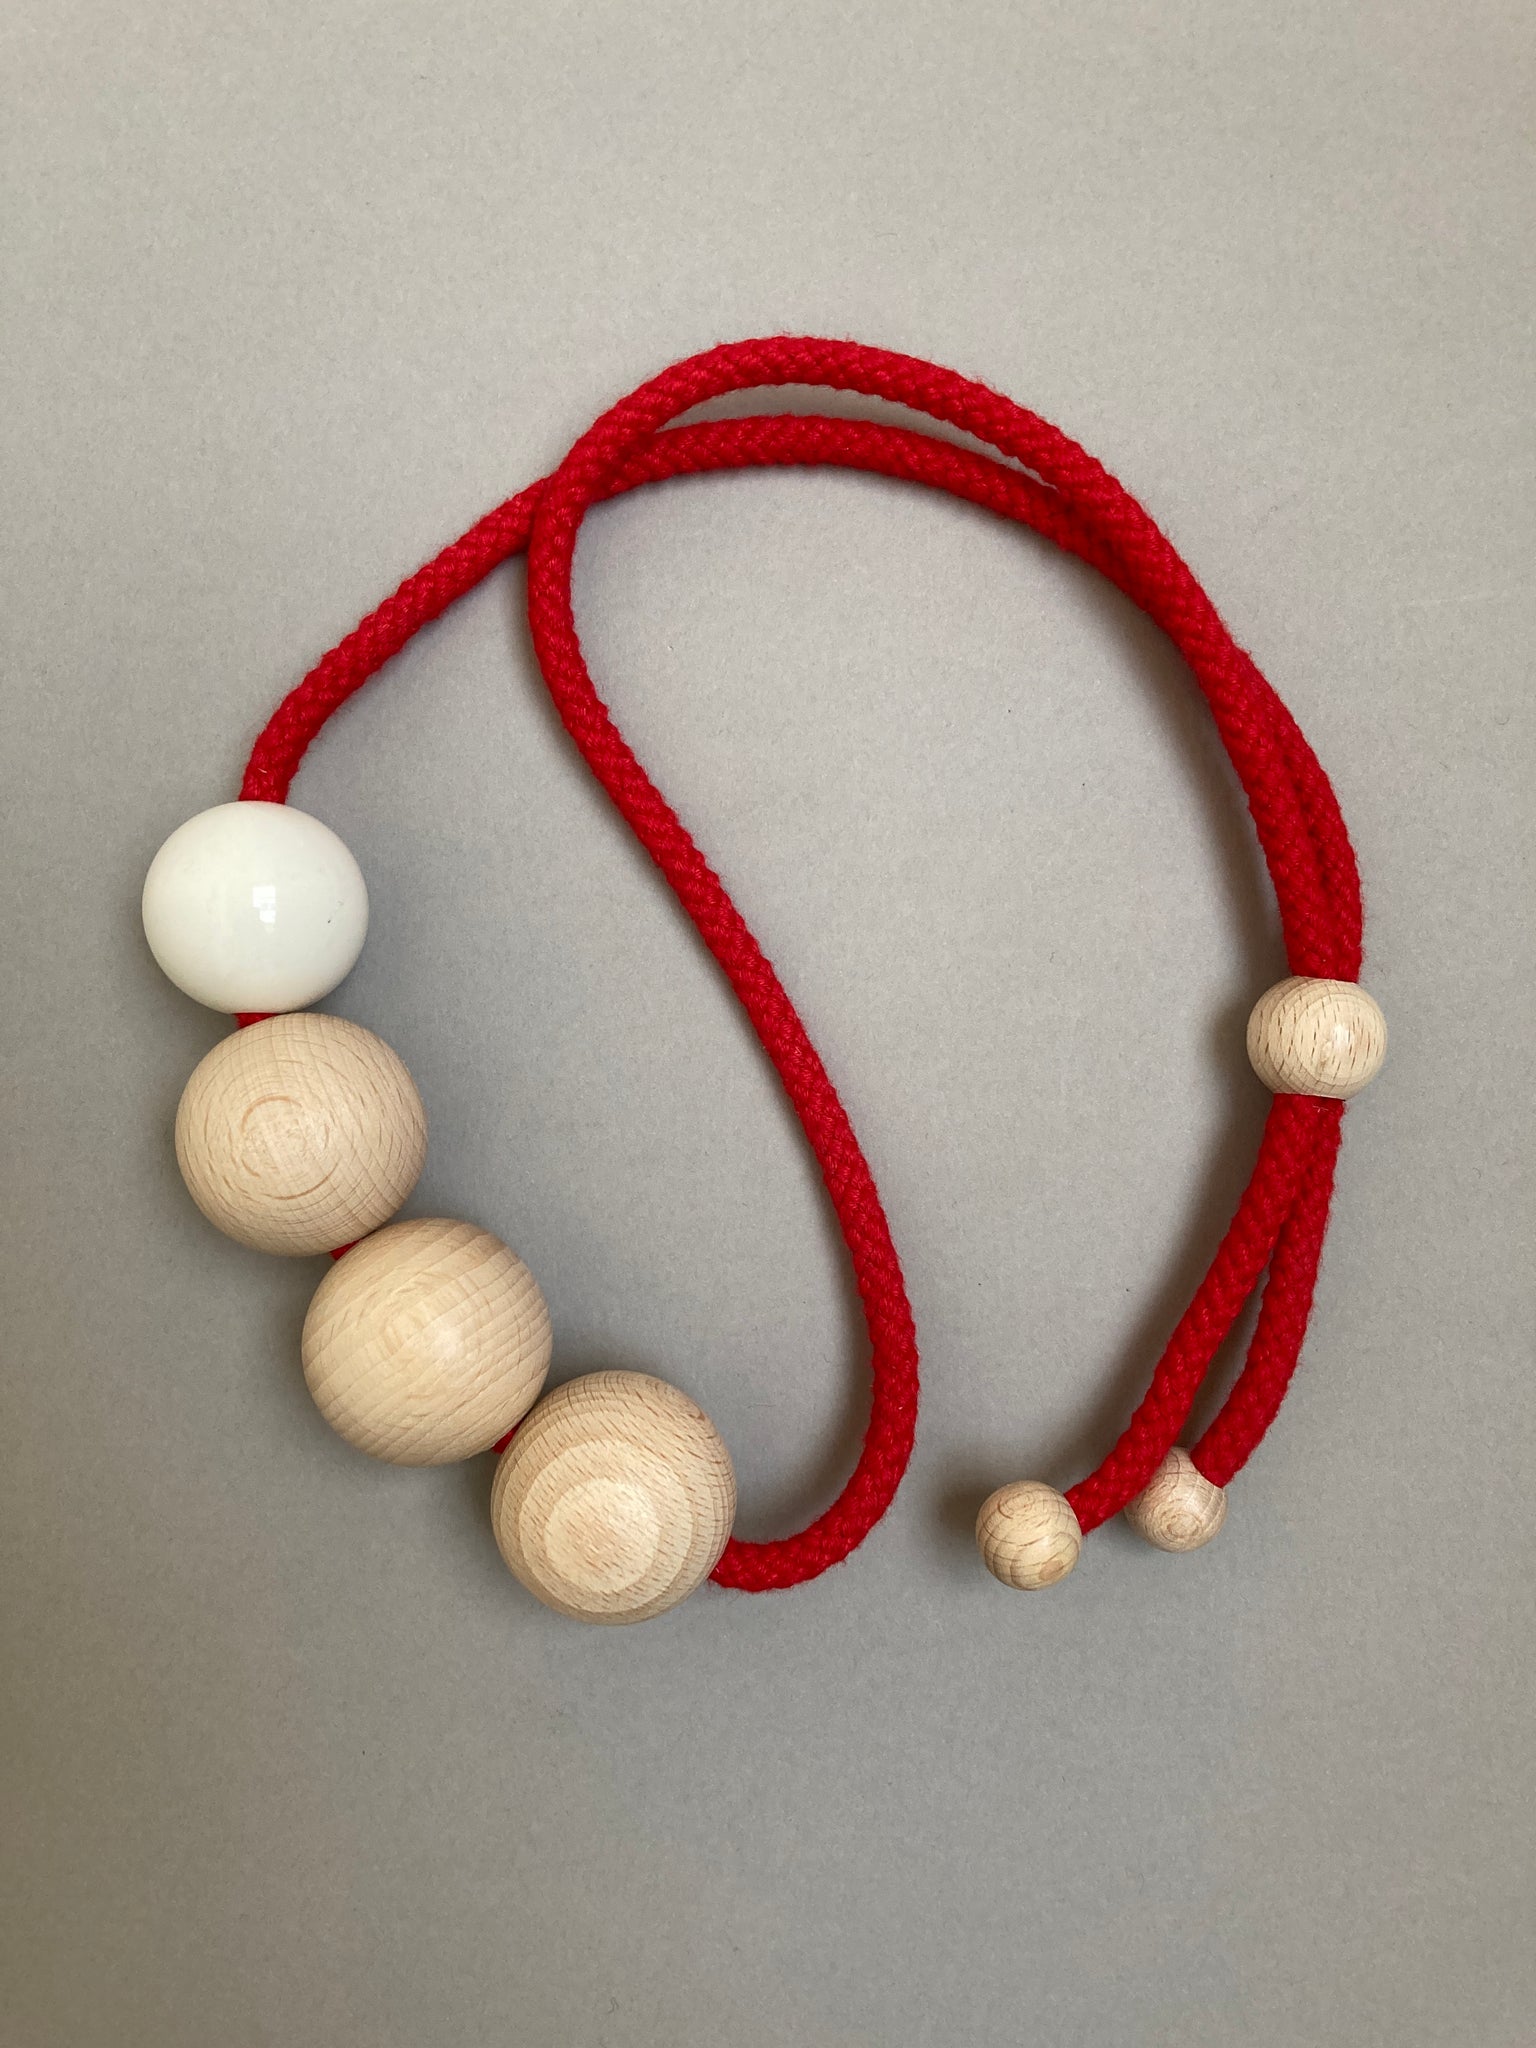 Sample necklace on red cord